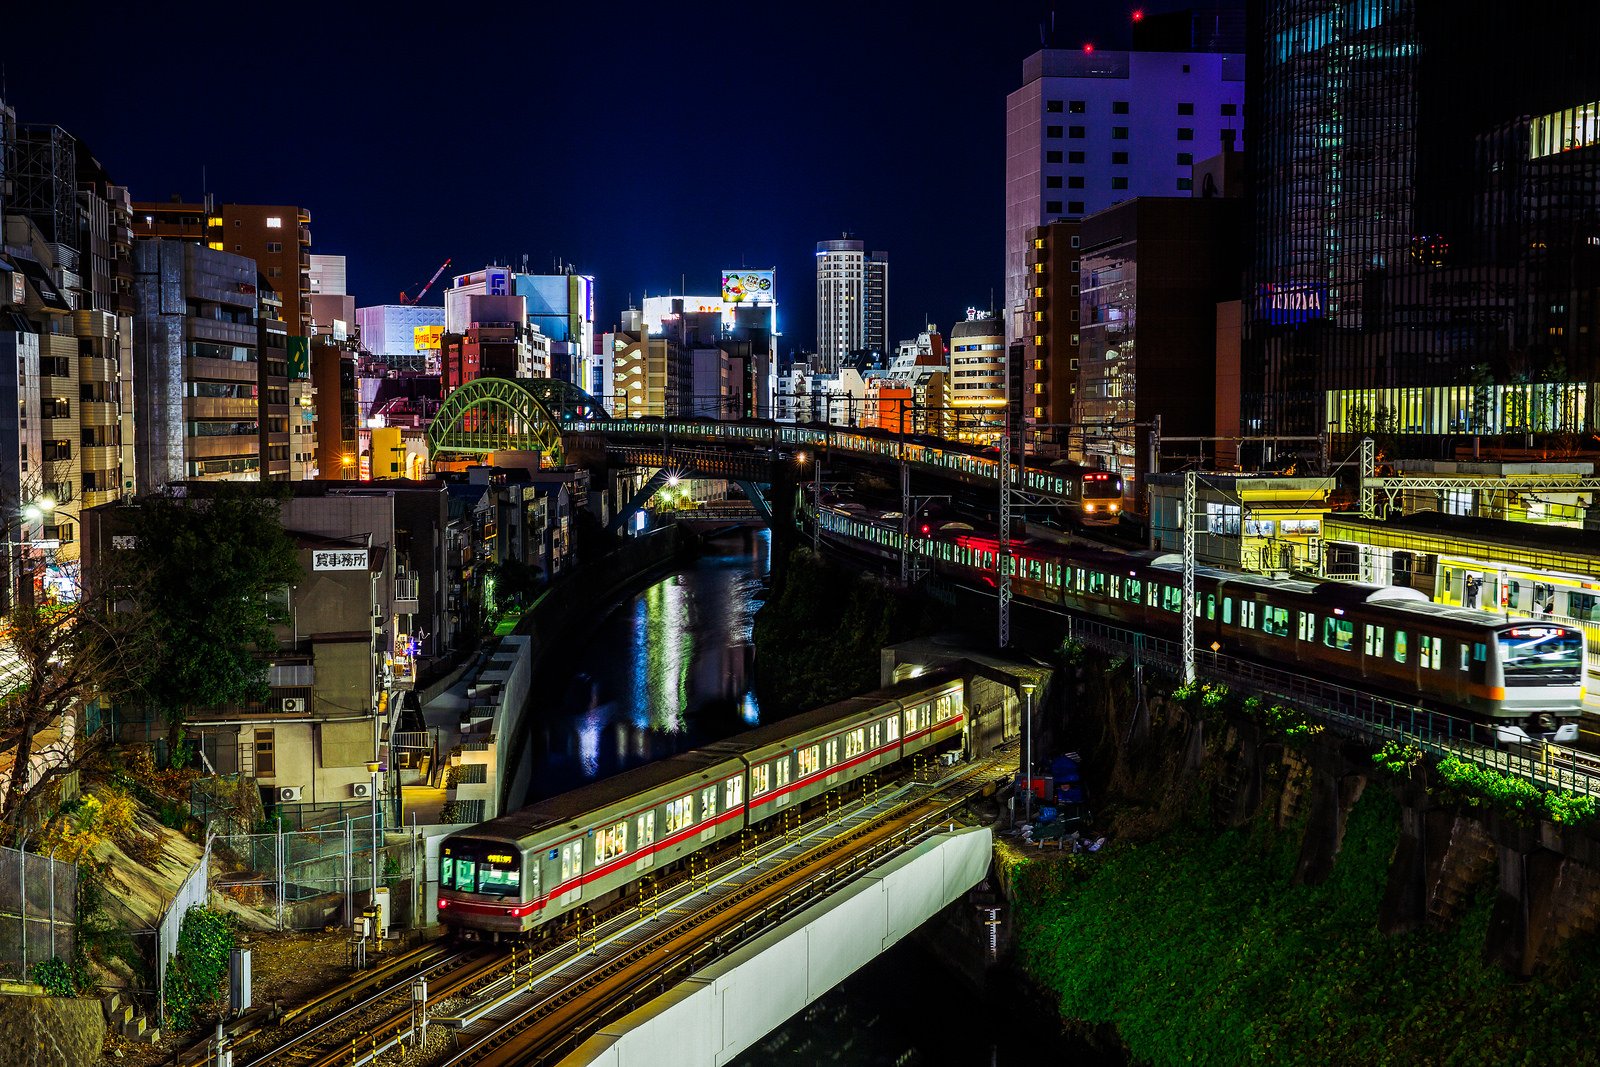 japan, Japon, Architecture, Bridges, Freeway, Building, Cities, Monuments, Night, Panorama, Panoramic, Rivers, Tower, Towers, Tokyo, Ray, Light, Rail, Train Wallpaper